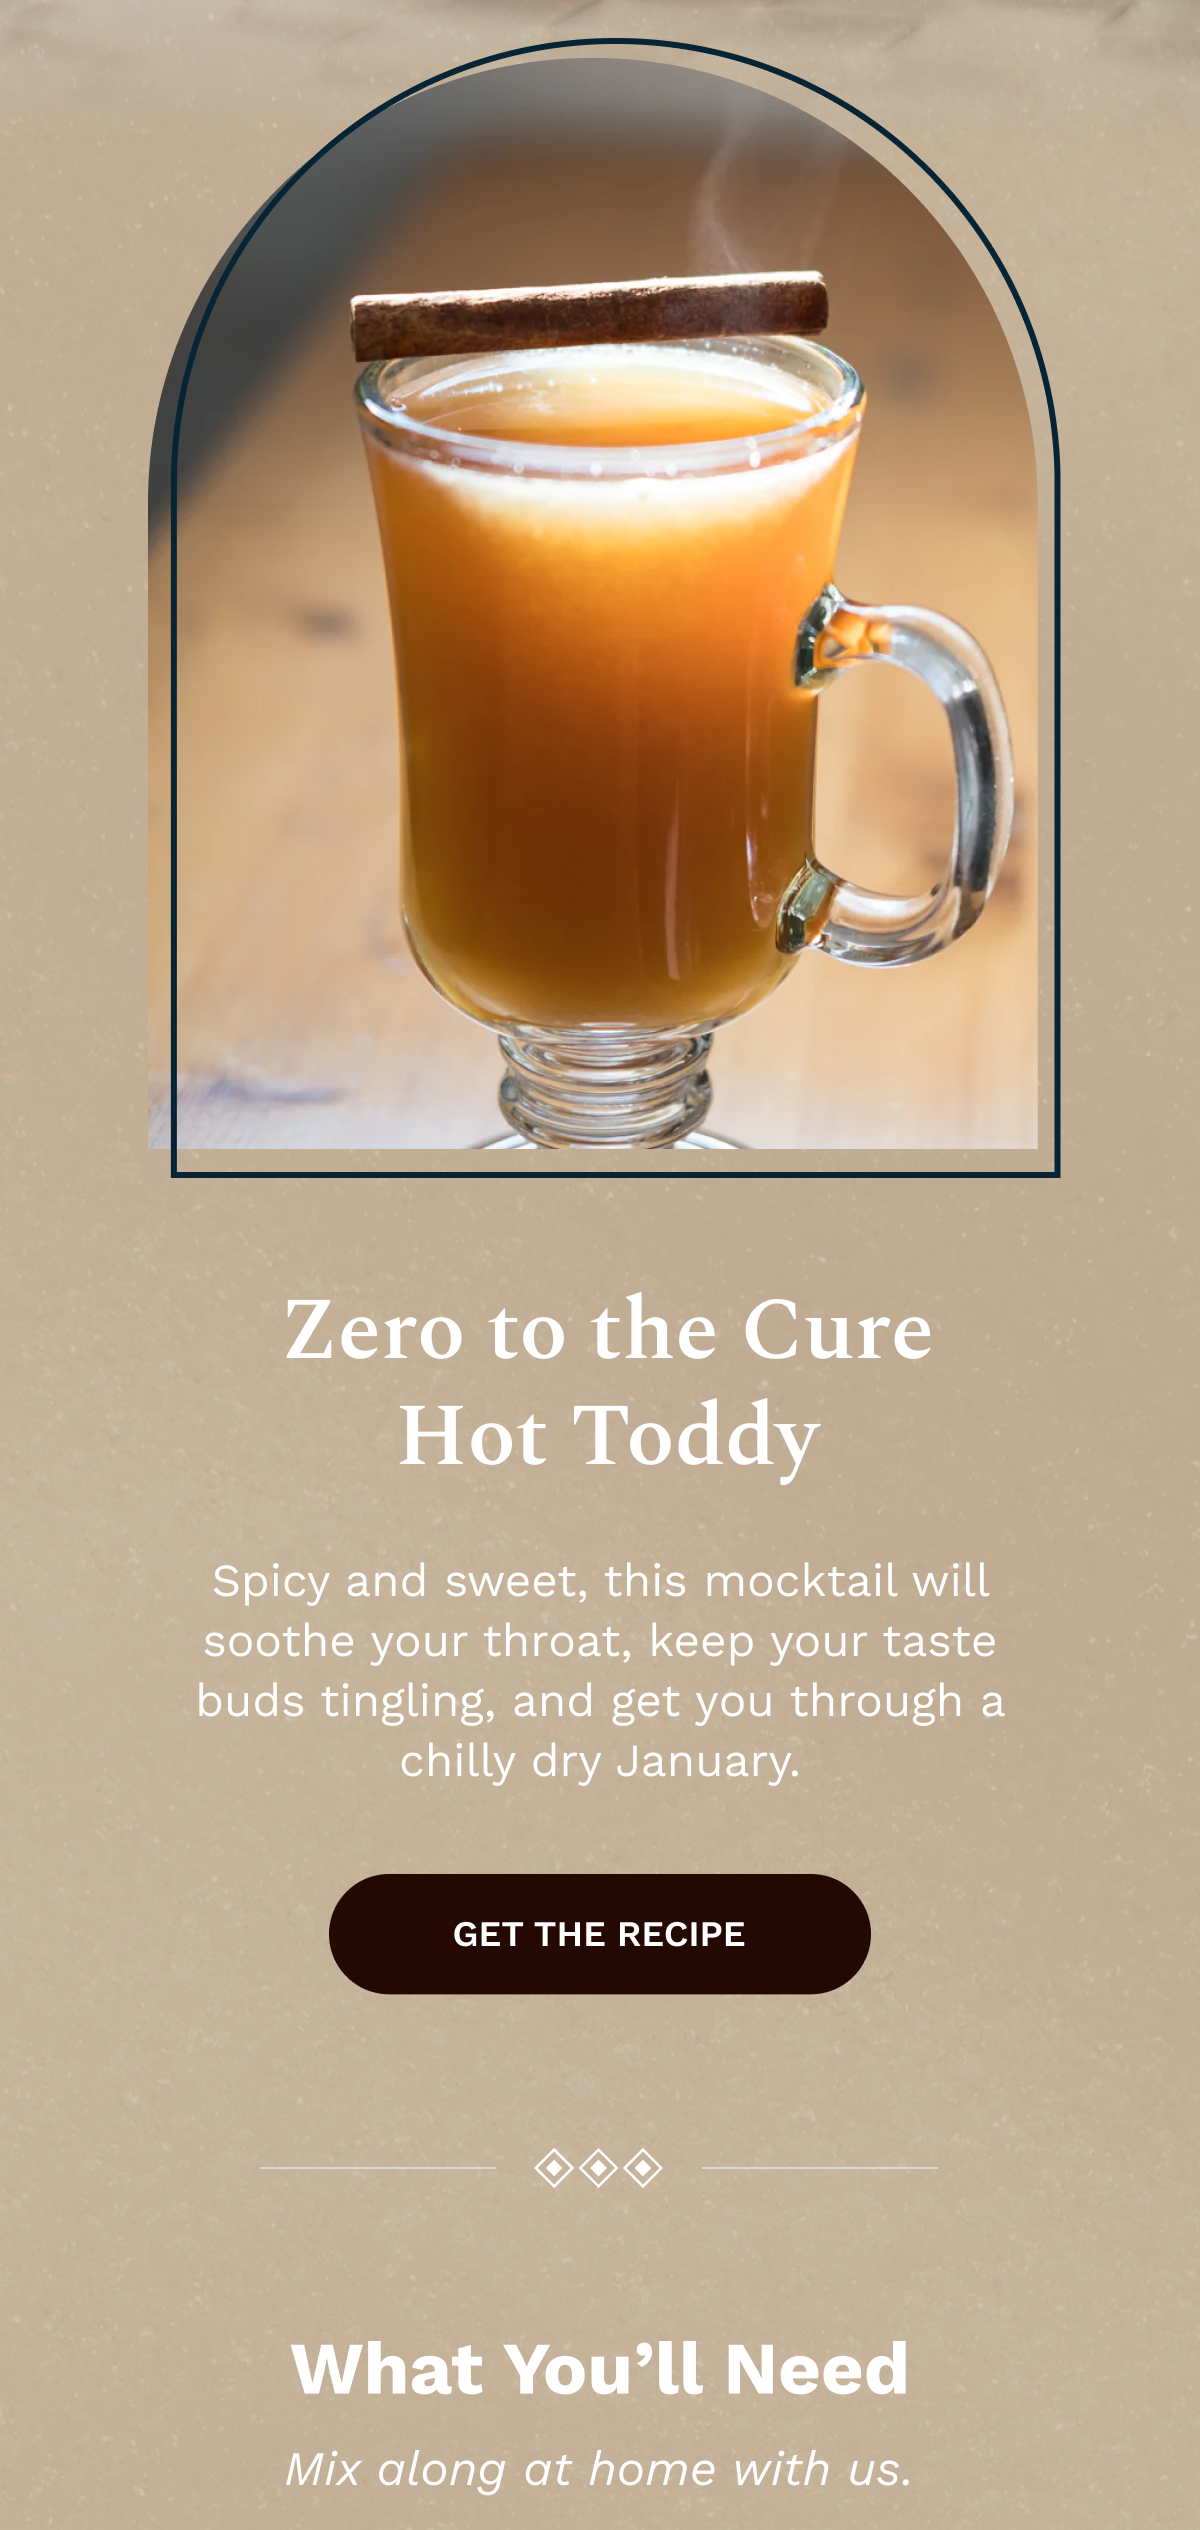 Zero to the Cure Hot Toddy